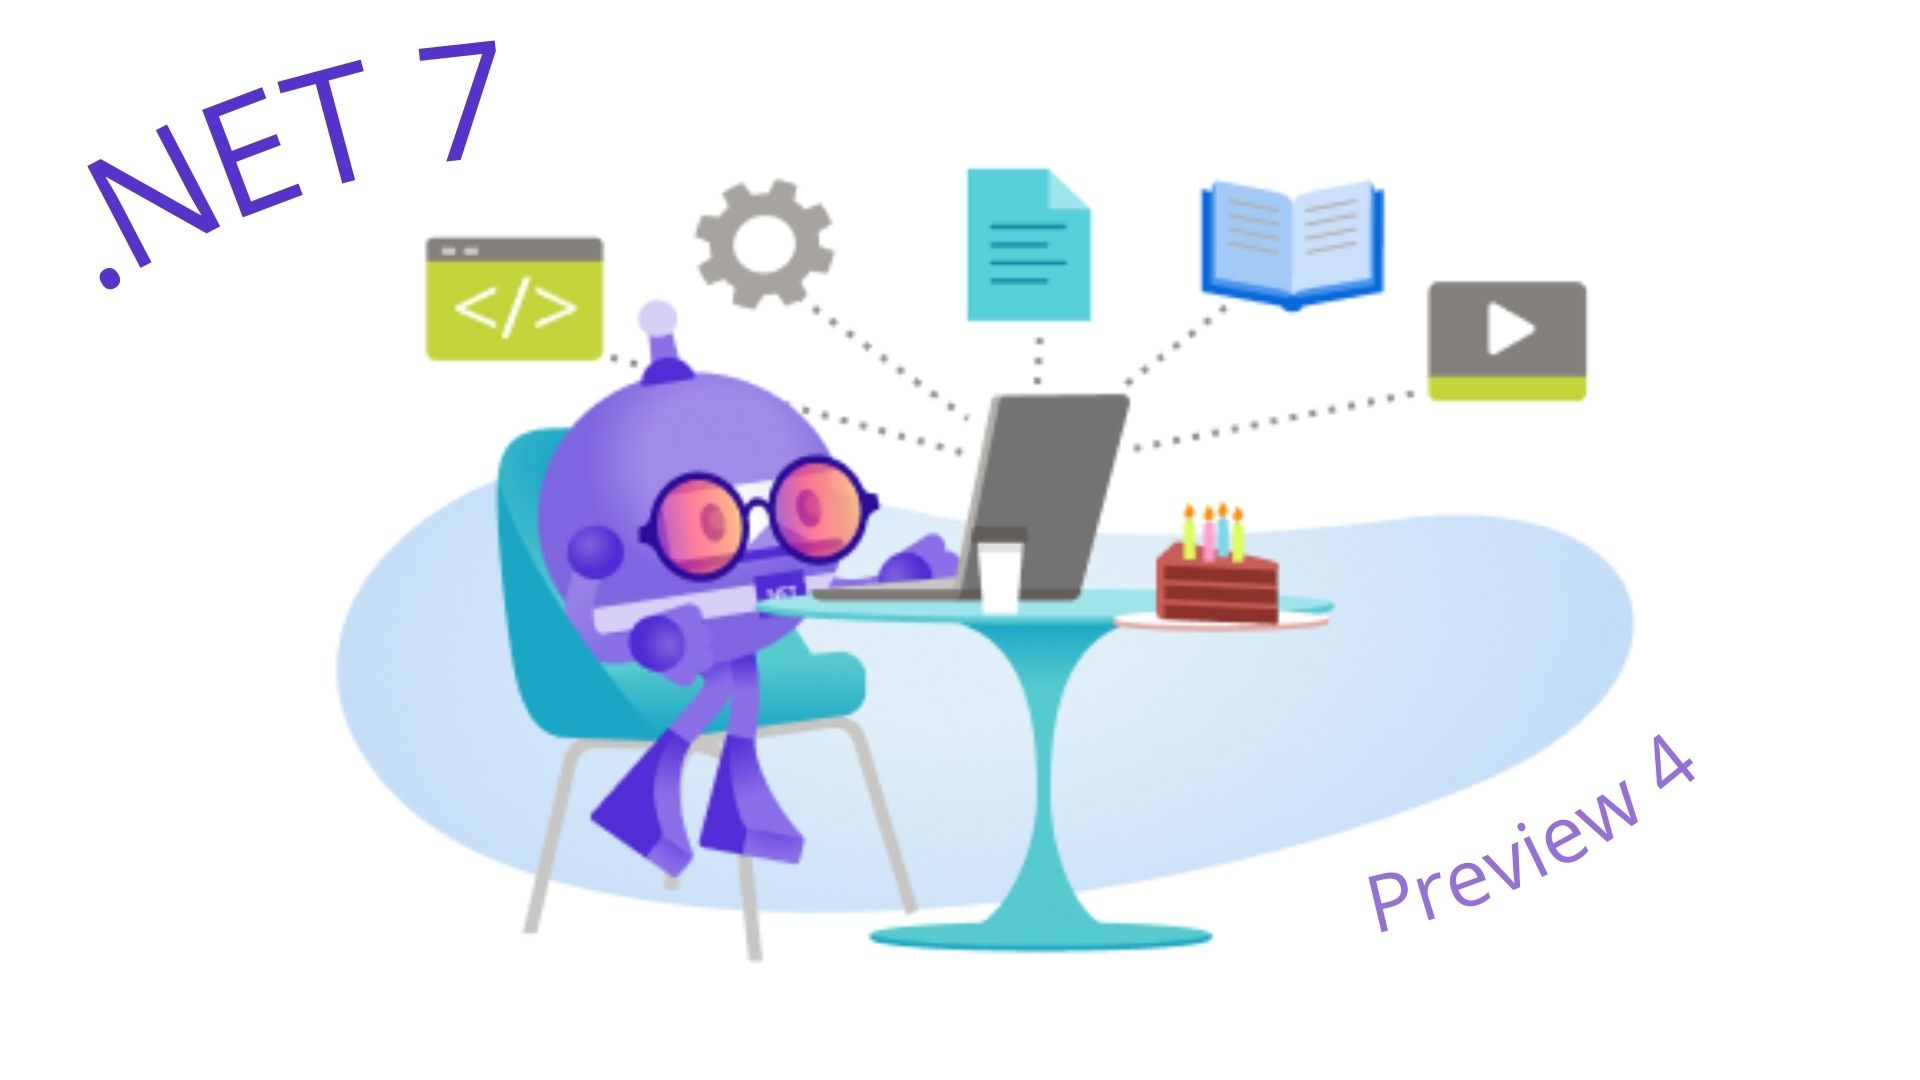 Today we released .NET 7 Preview 4. The fourth preview of .NET 7 includes enhancements to observability in the .NET implementation of OpenTelemetry, t